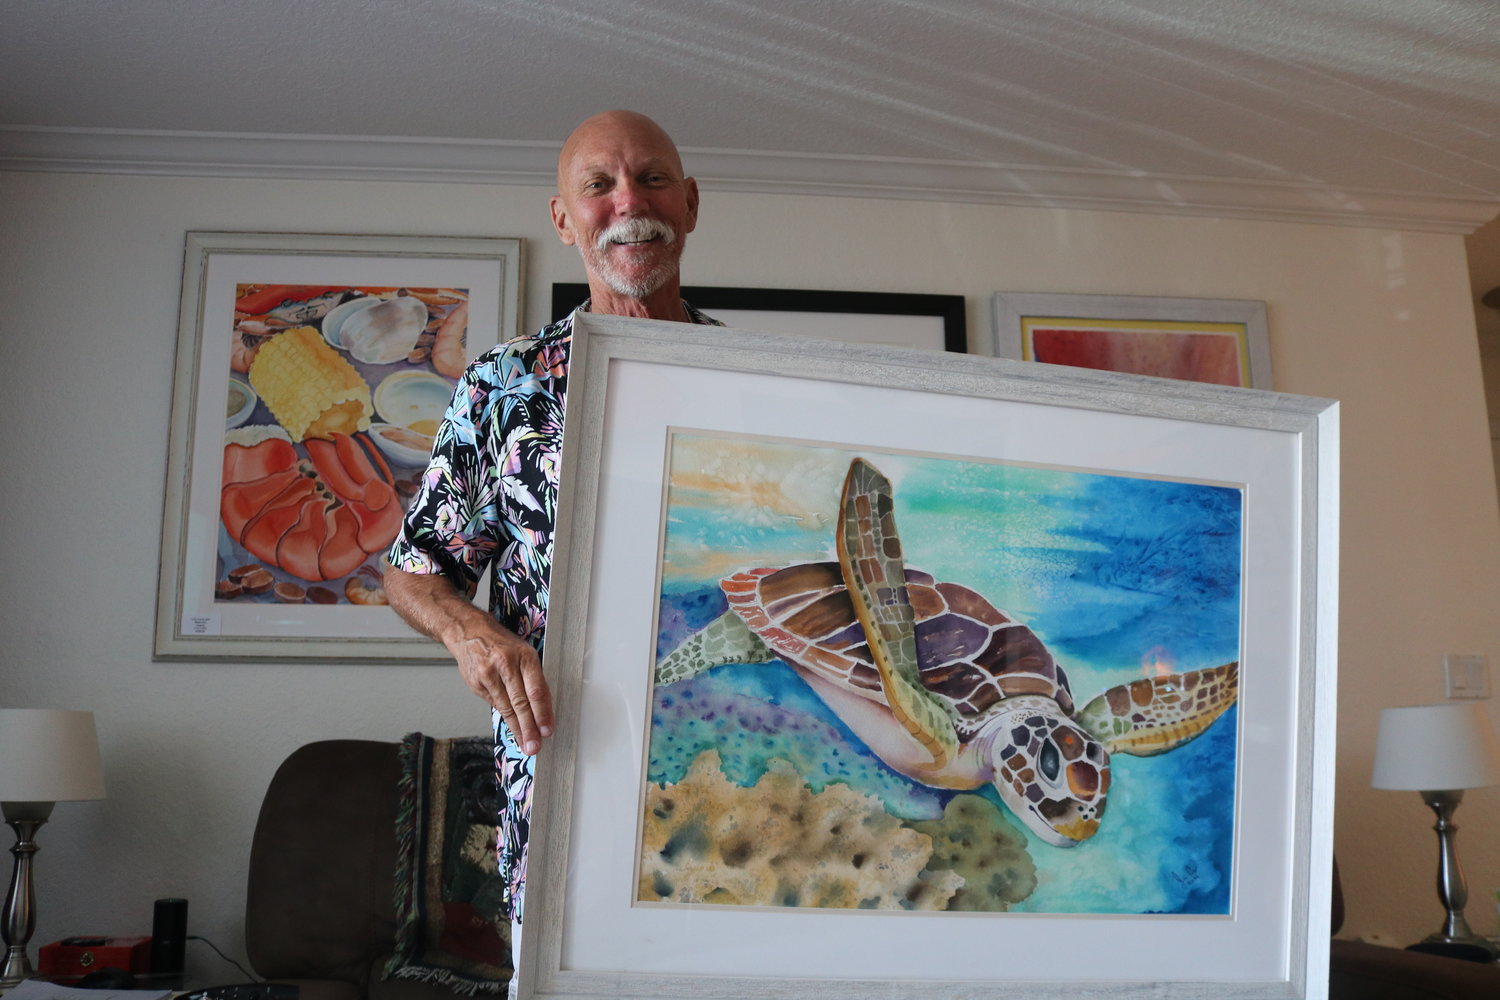 Jim Cox of Ponte Vedra Beach will have his art on display throughout the month beginning July 9 at the Adele Grage Cultural Center in Atlantic Beach.